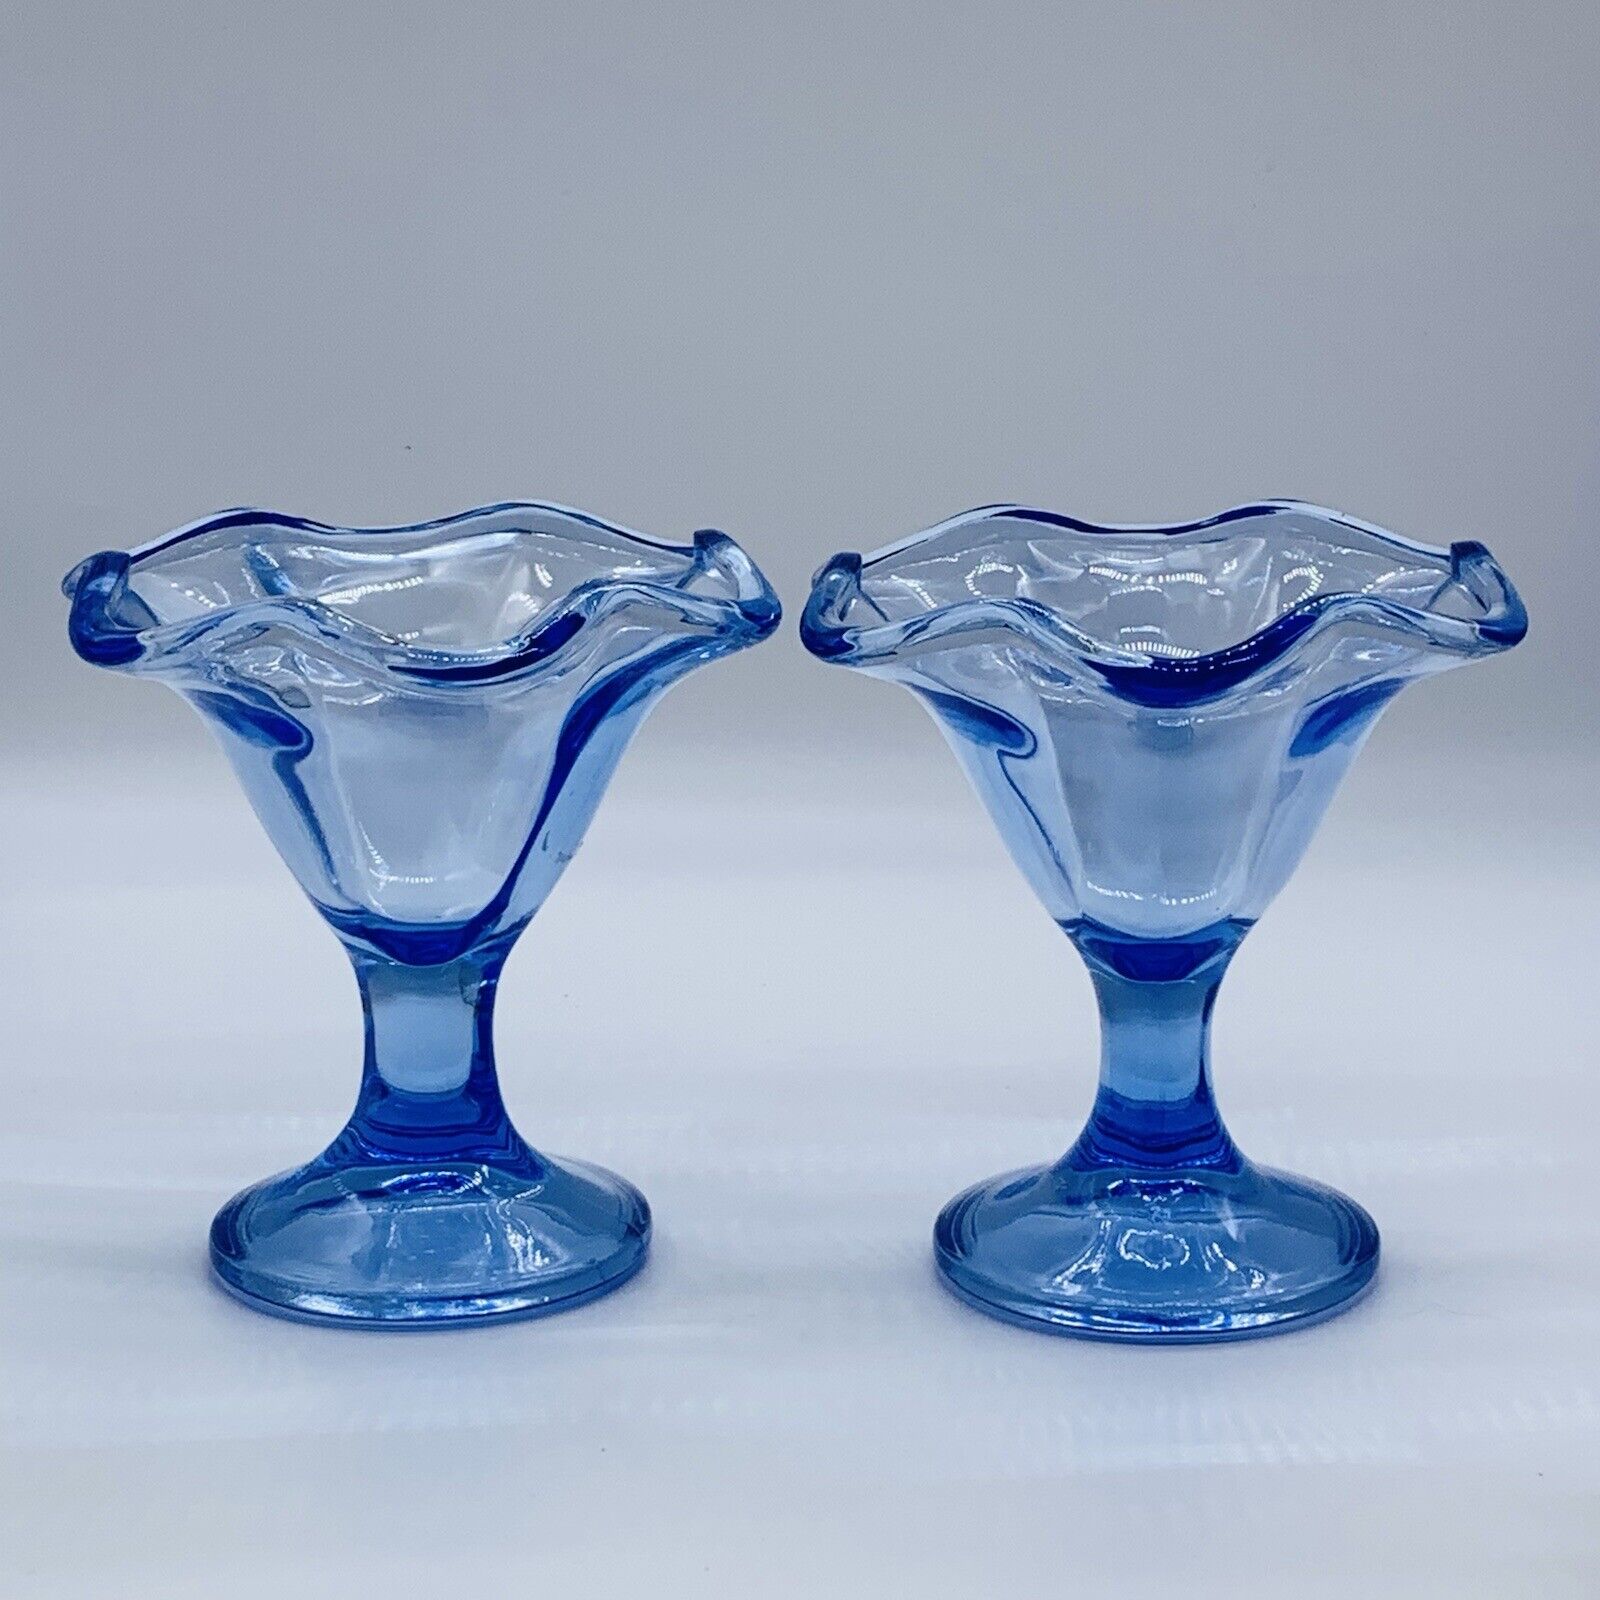 Italian Dessert Ice Cream Footed Bowl Glass  Blue Container Set 2 Pcs 5”T 4.5”W